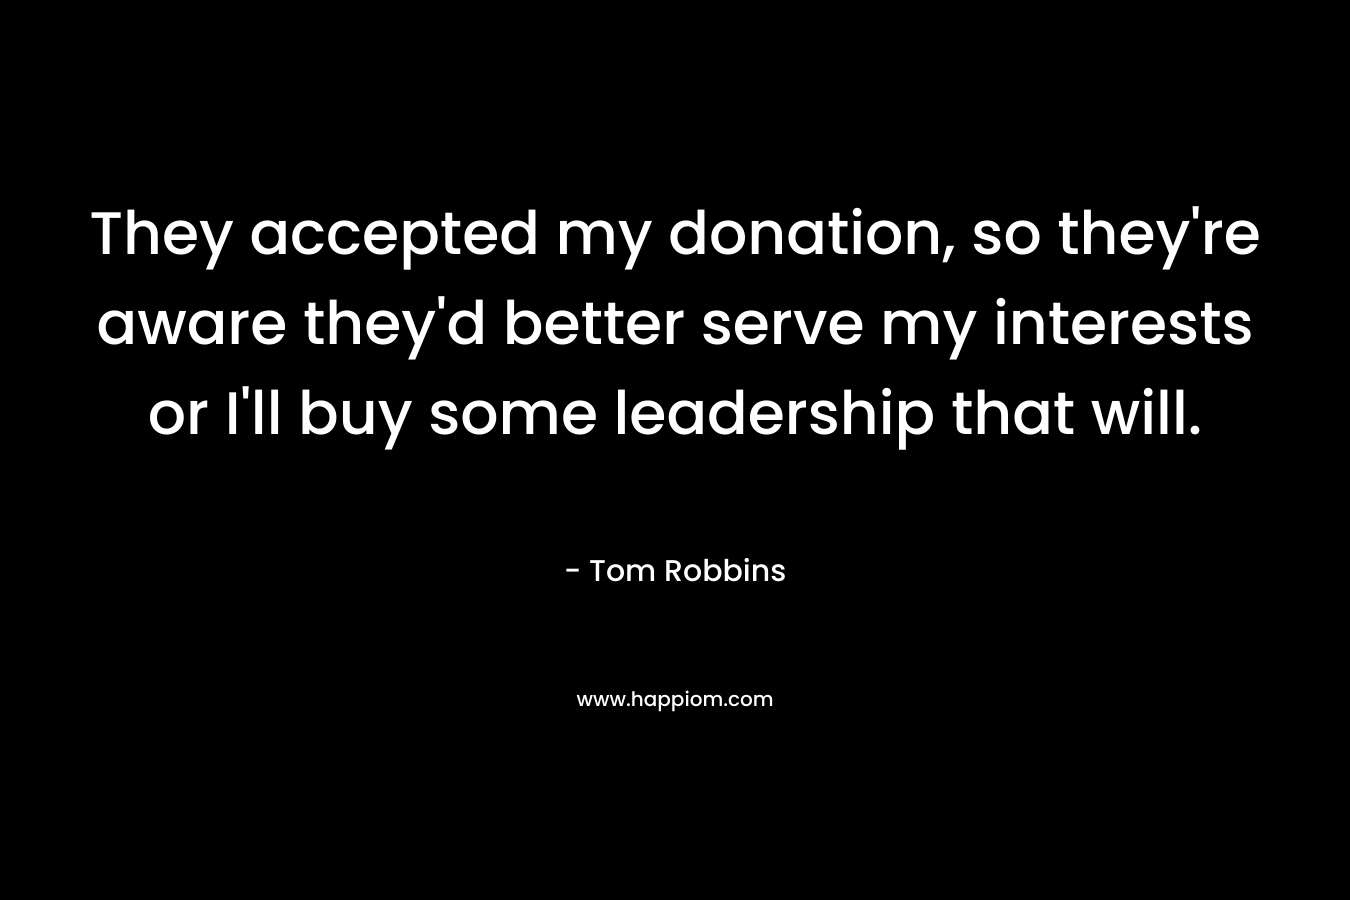 They accepted my donation, so they’re aware they’d better serve my interests or I’ll buy some leadership that will. – Tom Robbins